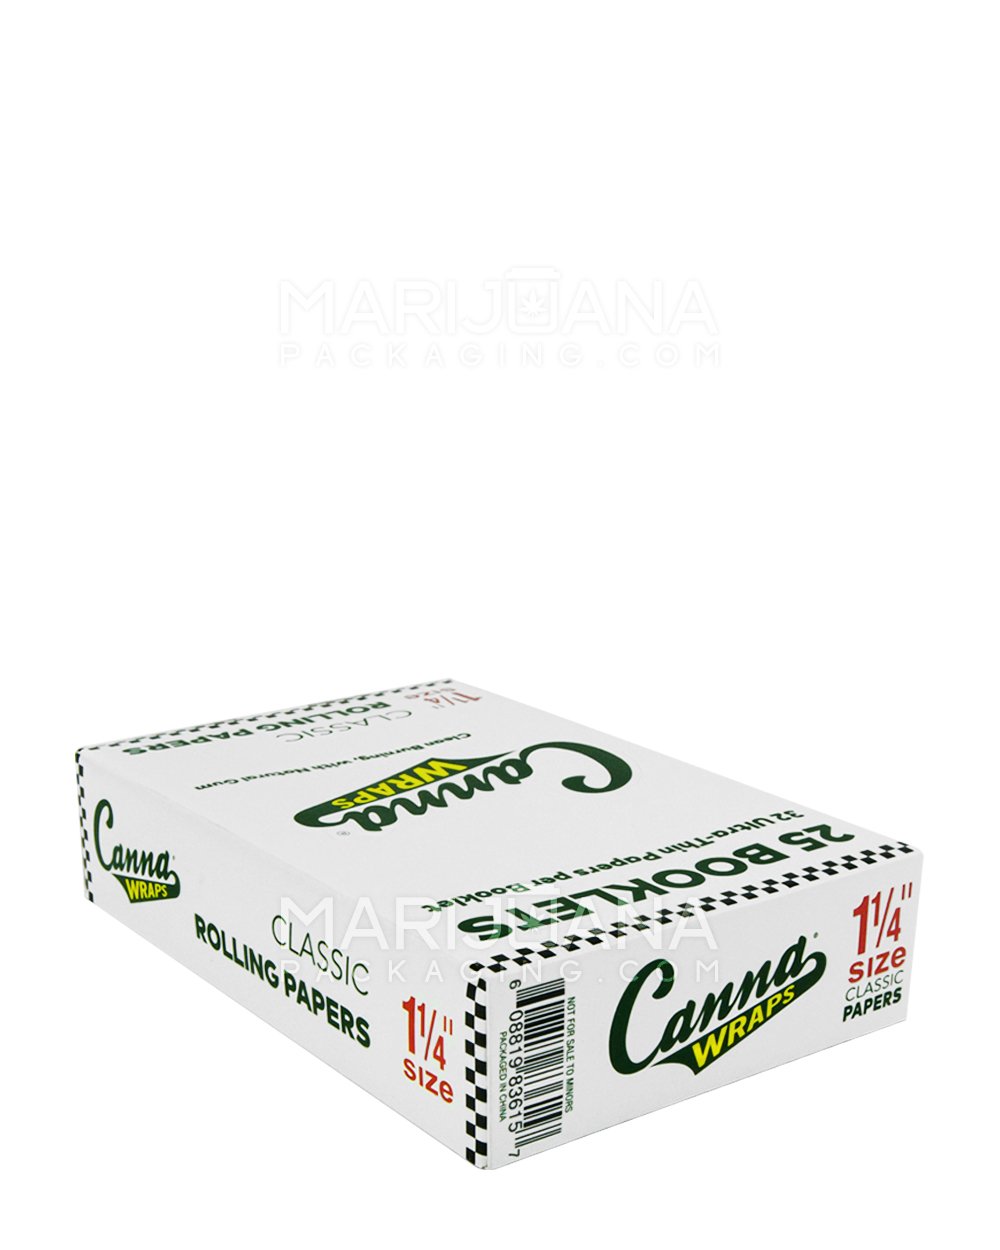 CANNA WRAPS | 'Retail Display' 1 1/4 Size Rolling Papers | 83mm - Classic - 25 Count - 4